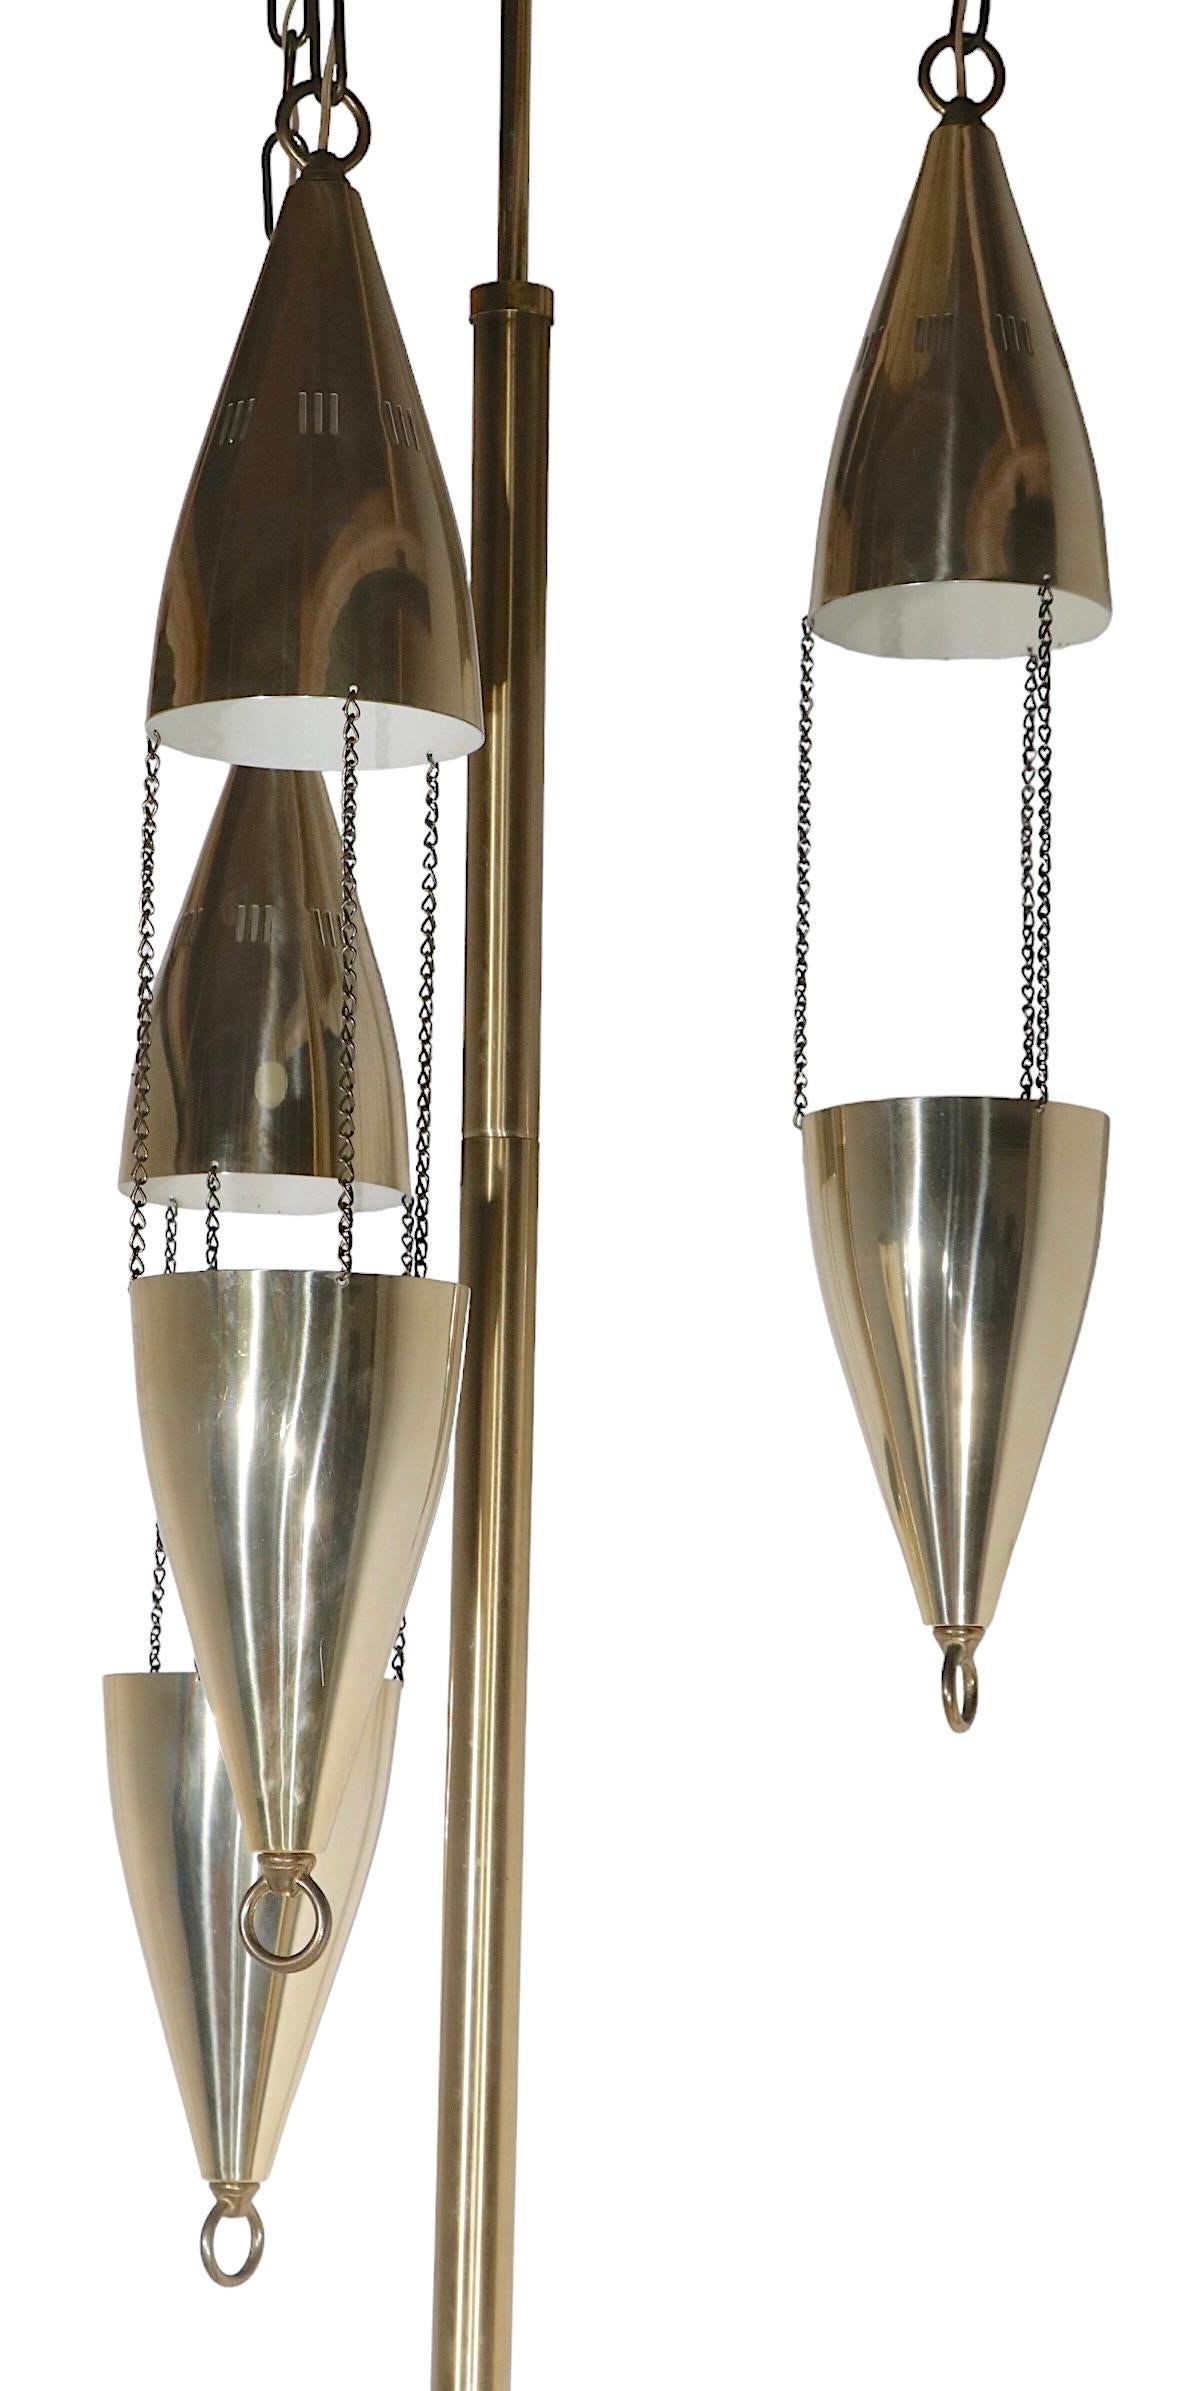 Architectural Mid Century Tension Pole Lamp c 1950- 1960's 4